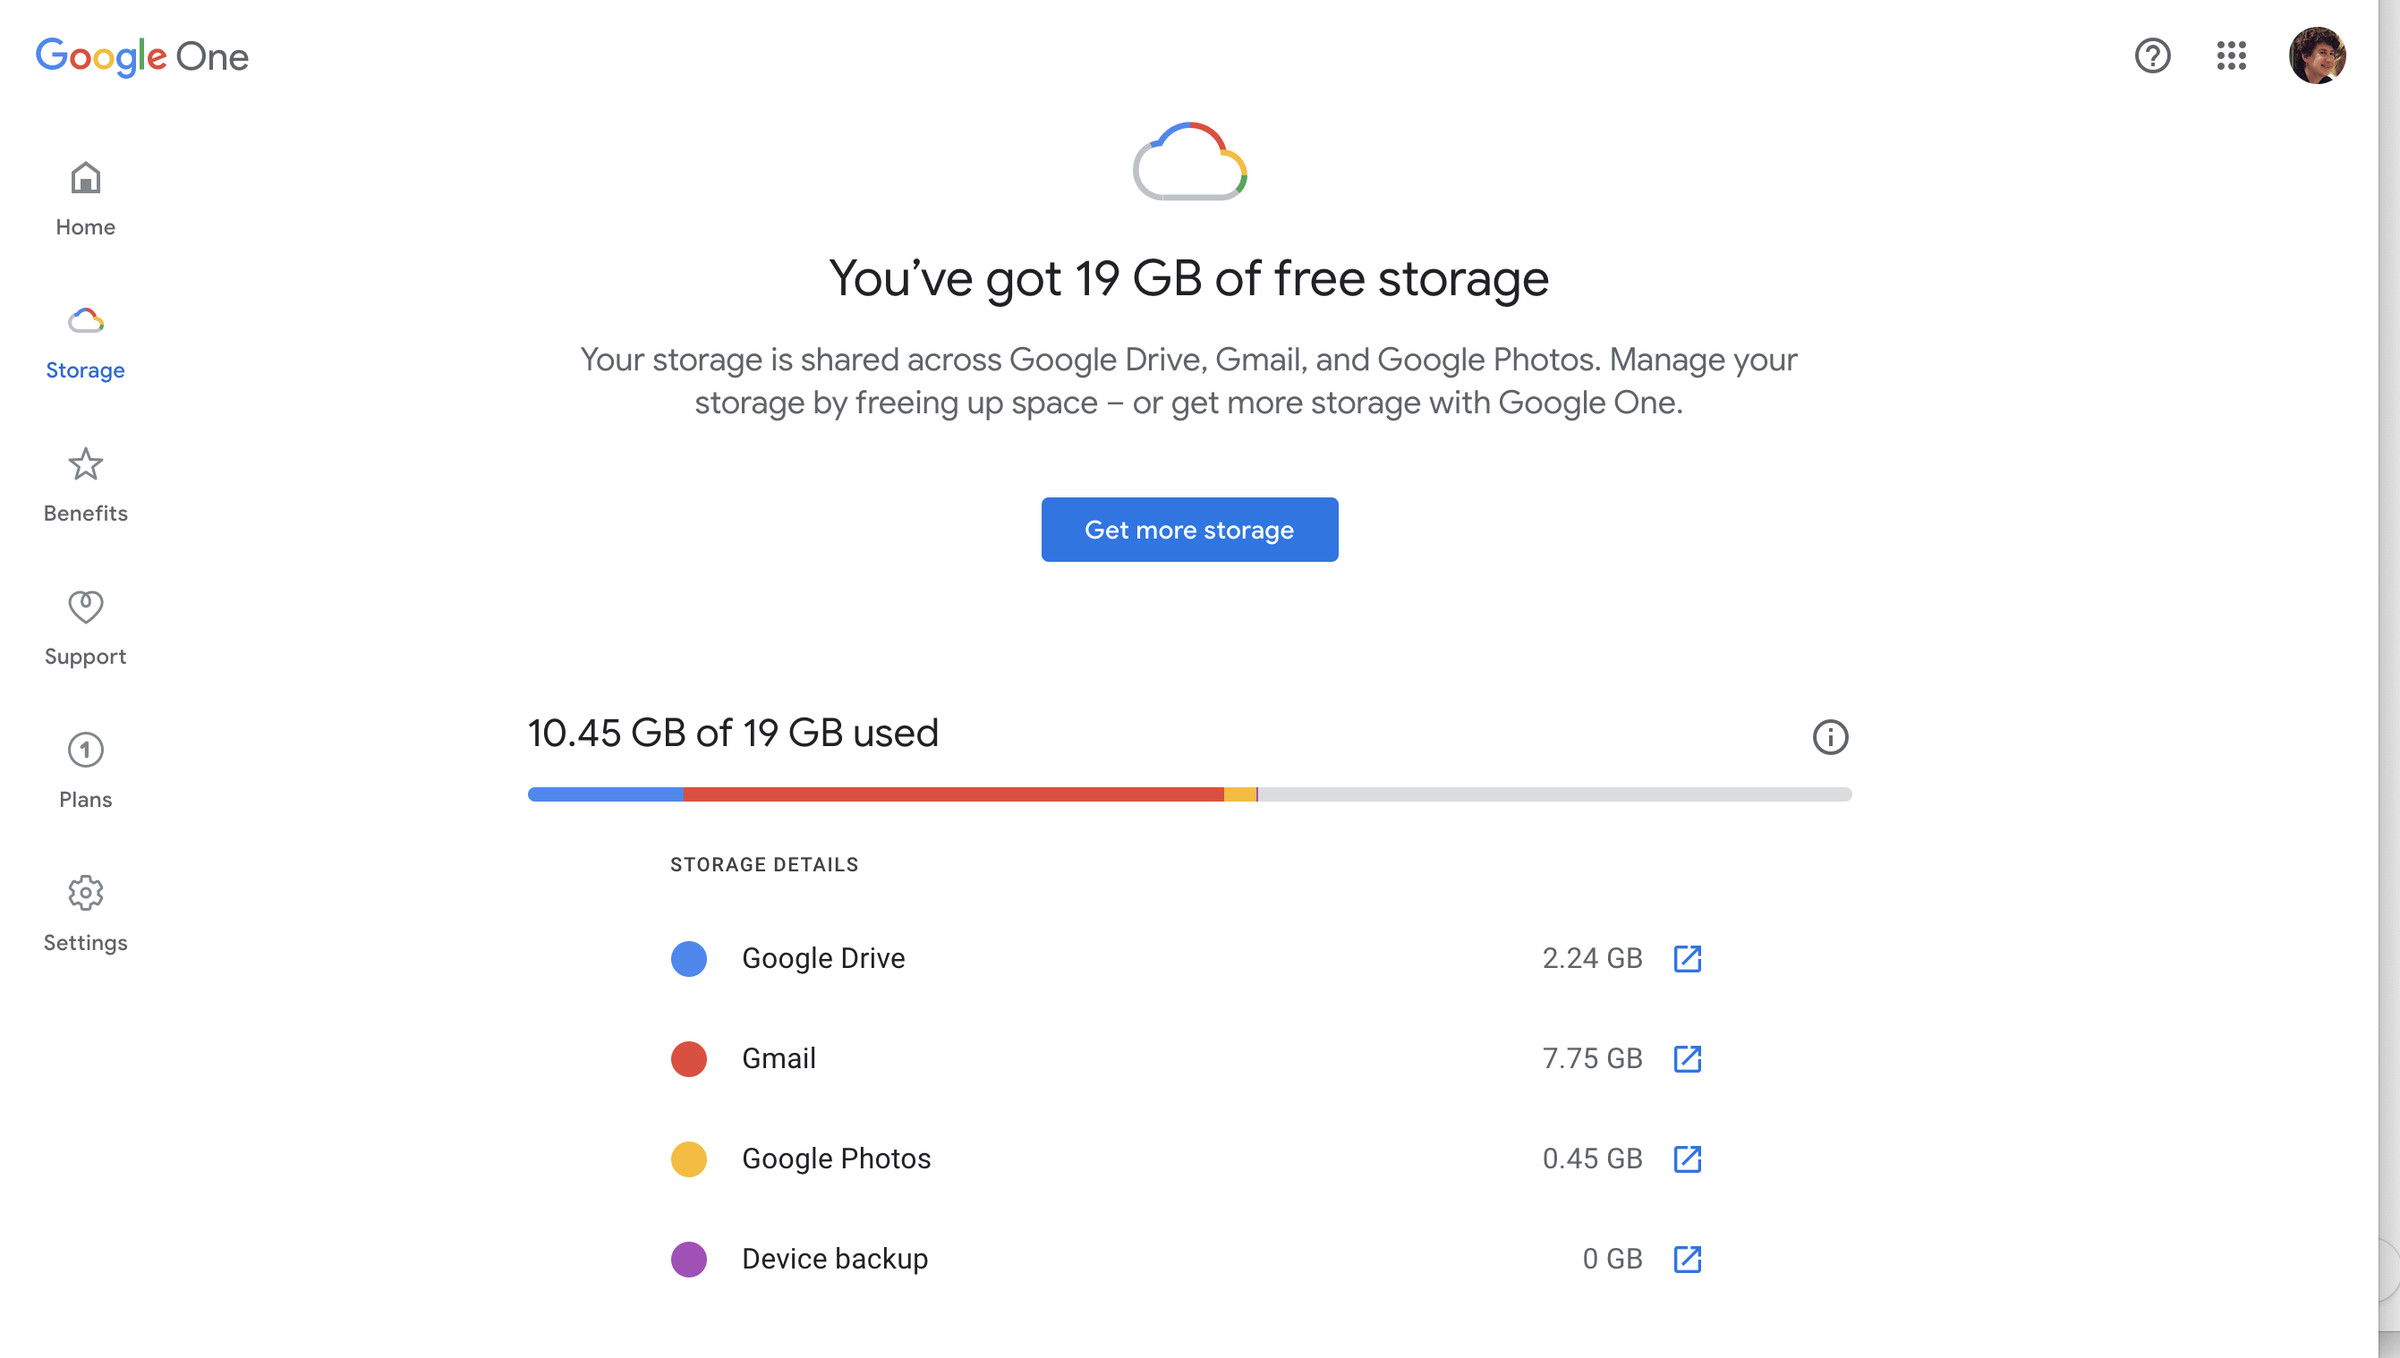 https://www.theverge.com/2019/3/19/18271015/google-drive-photos-storage-space-how-to-get-more